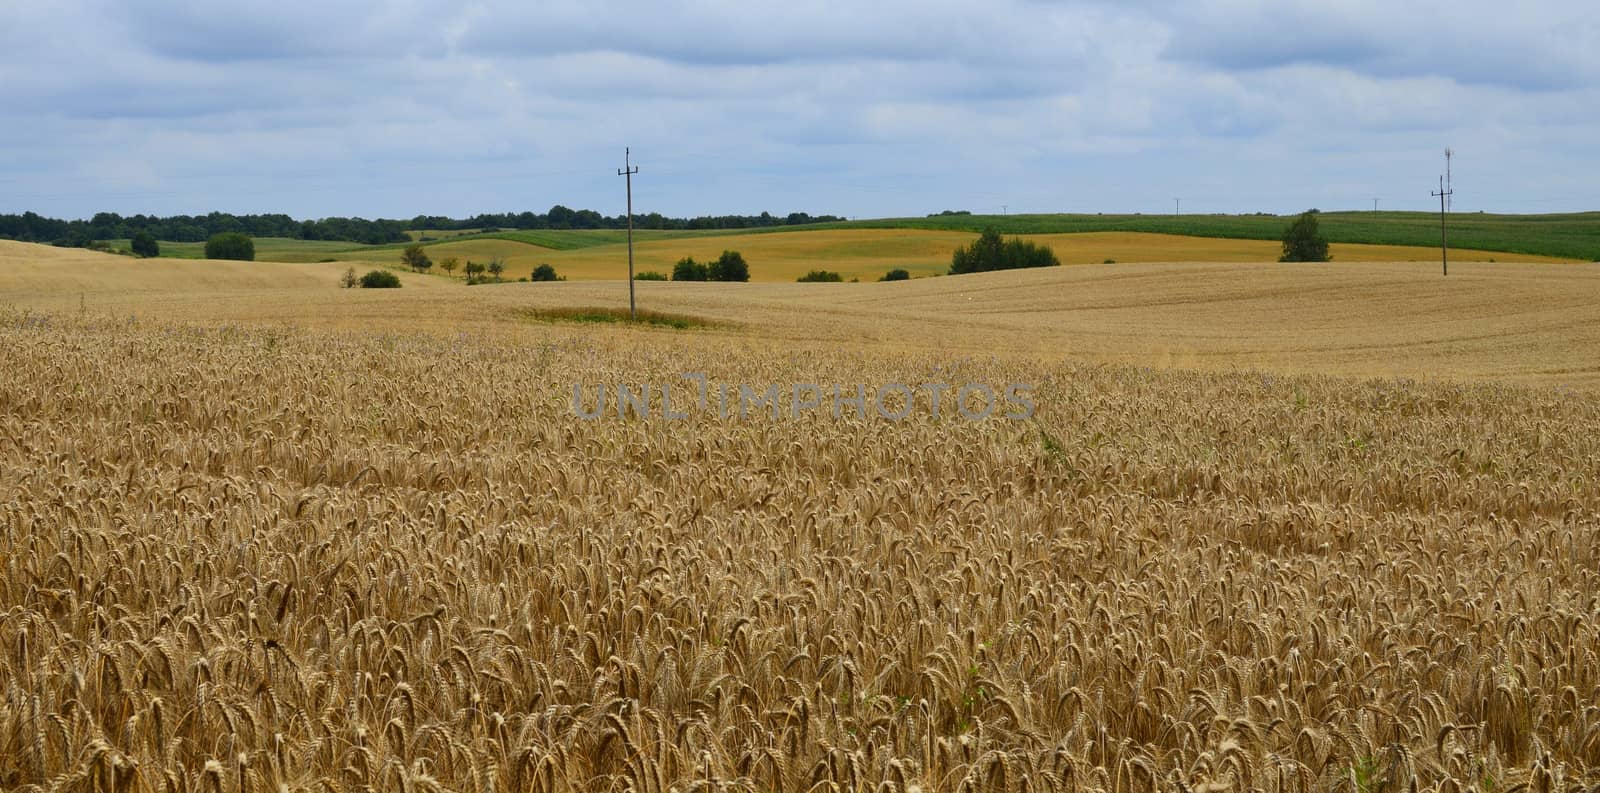 Grain and corn fields creating amazing lanscape